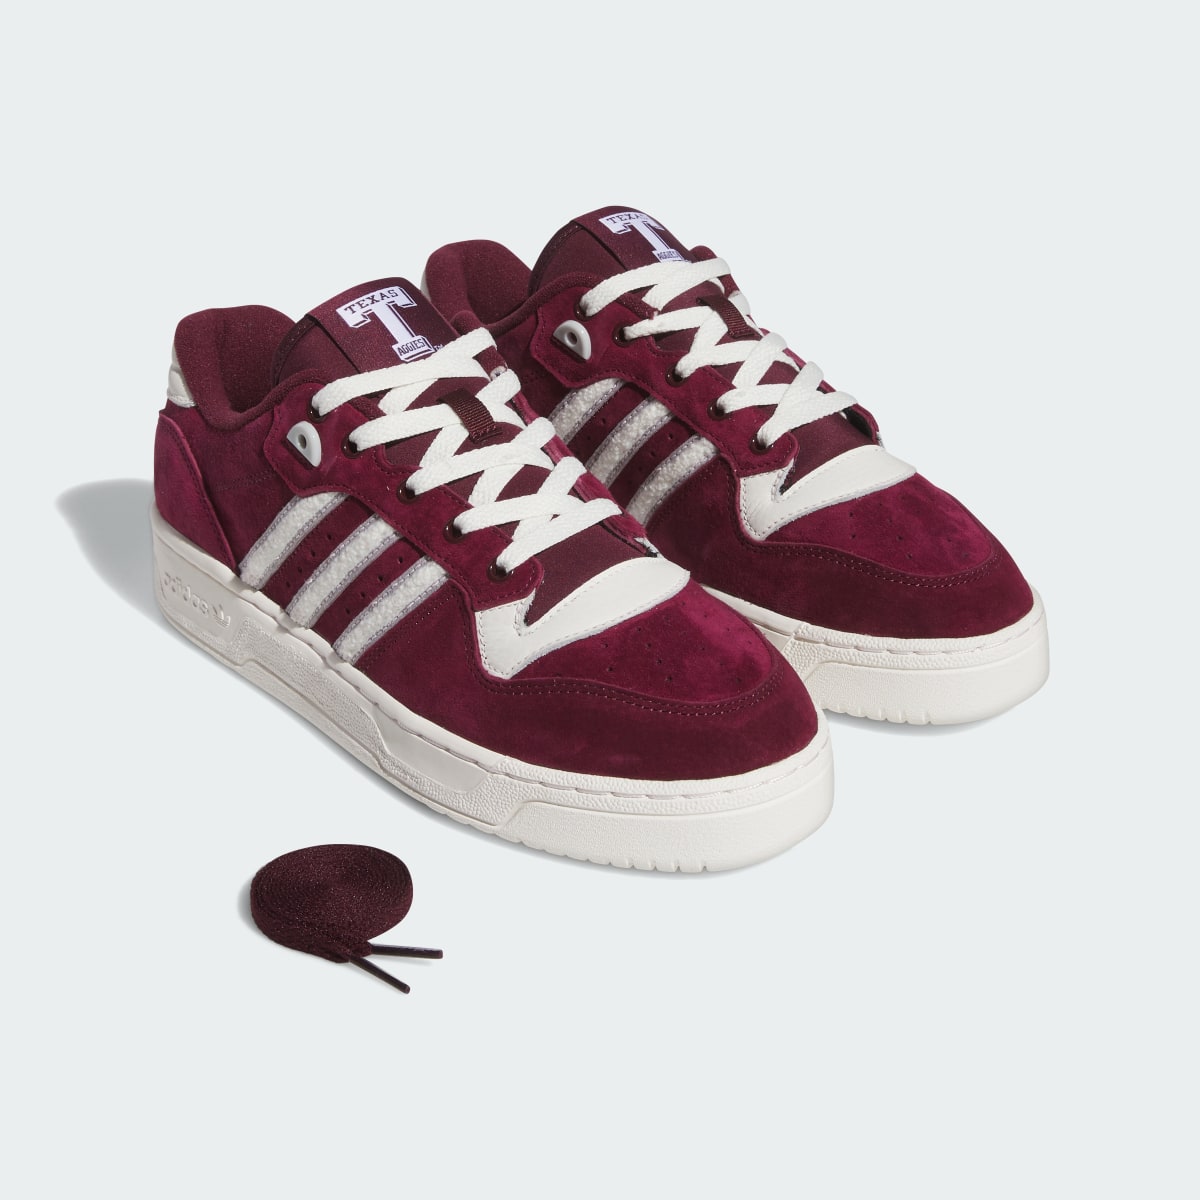 Adidas Texas A&M Rivalry Low Shoes. 8